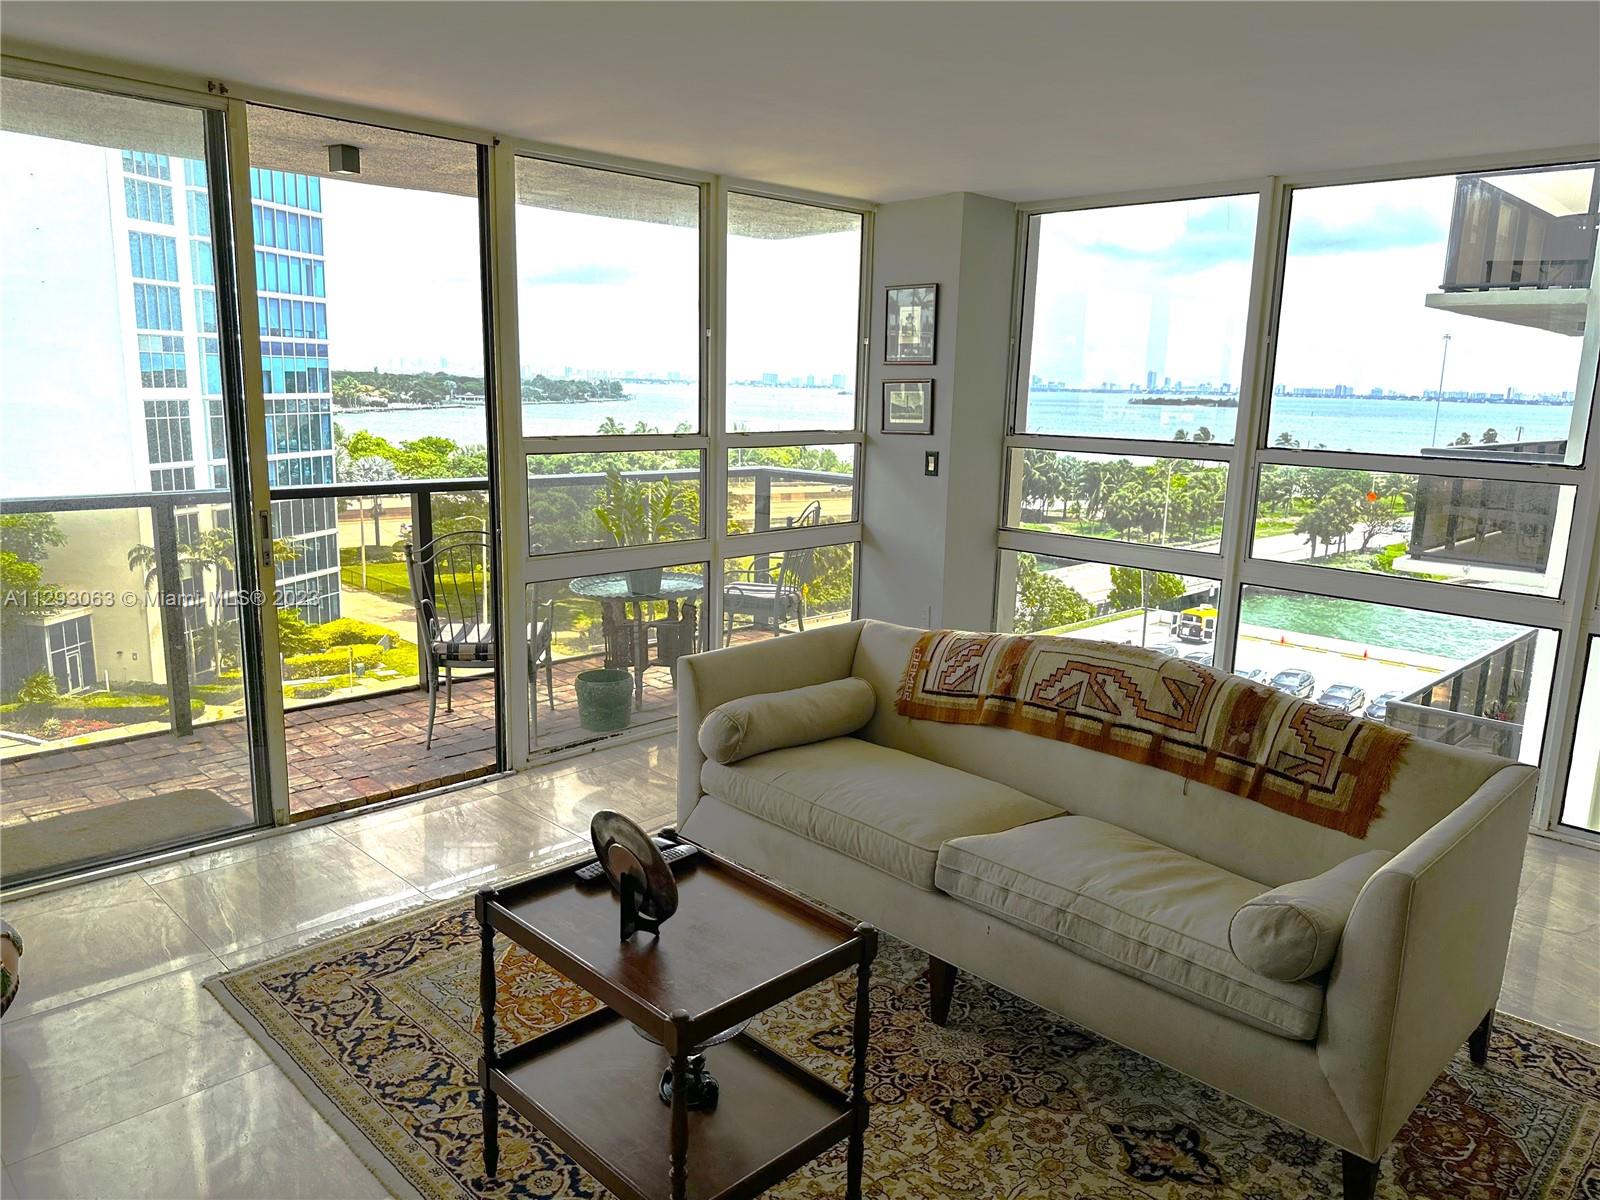 BEAUTIFUL VIEWS OF BISCAYNE BAY FROM THIS LARGE CORNER CONDO IN TRENDY EDGEWATER! Sunlight pours into this spacious 2BED/2BATH + OFFICE residence with floor to ceiling glass, balcony, porcelain floors, and open kitchen with breakfast area. Exceptionally large, main bedroom has elegant bathroom, custom closets and glass barn door. Two assigned, covered parking spaces and ample free guest spots. HOA includes Wi-Fi/cable, gym, sauna, tennis and pool. Waterfront building has 24/7 security with concierge, RESERVES, 45 yr certification! Live near Downtown Miami, Midtown and Design District's high-end shopping, Wynwood’s food scene, and Park on the Bay. NO ASSESSMENTS!